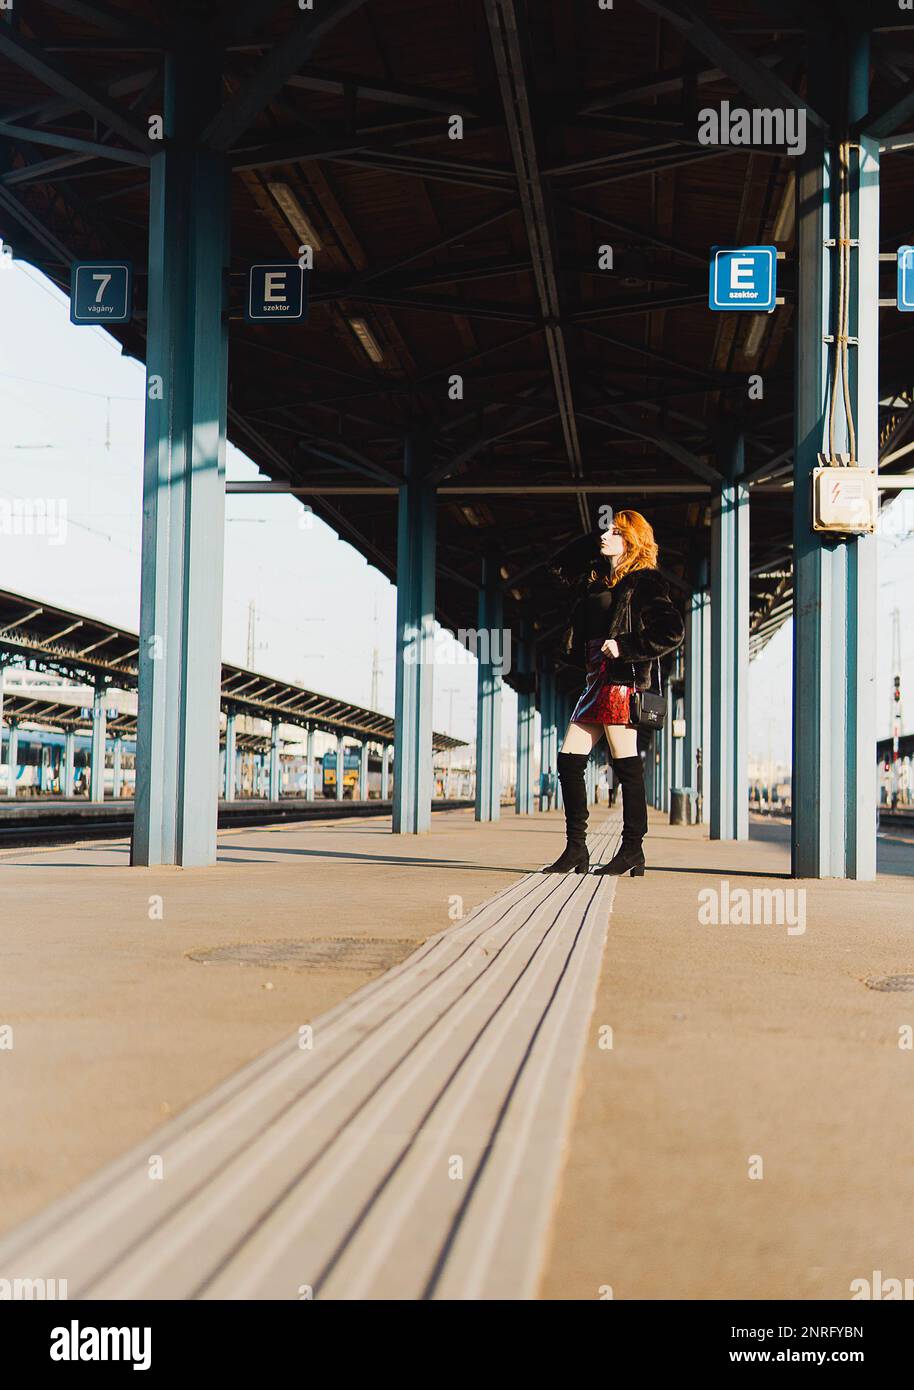 red-haired woman in train station waiting the train Stock Photo